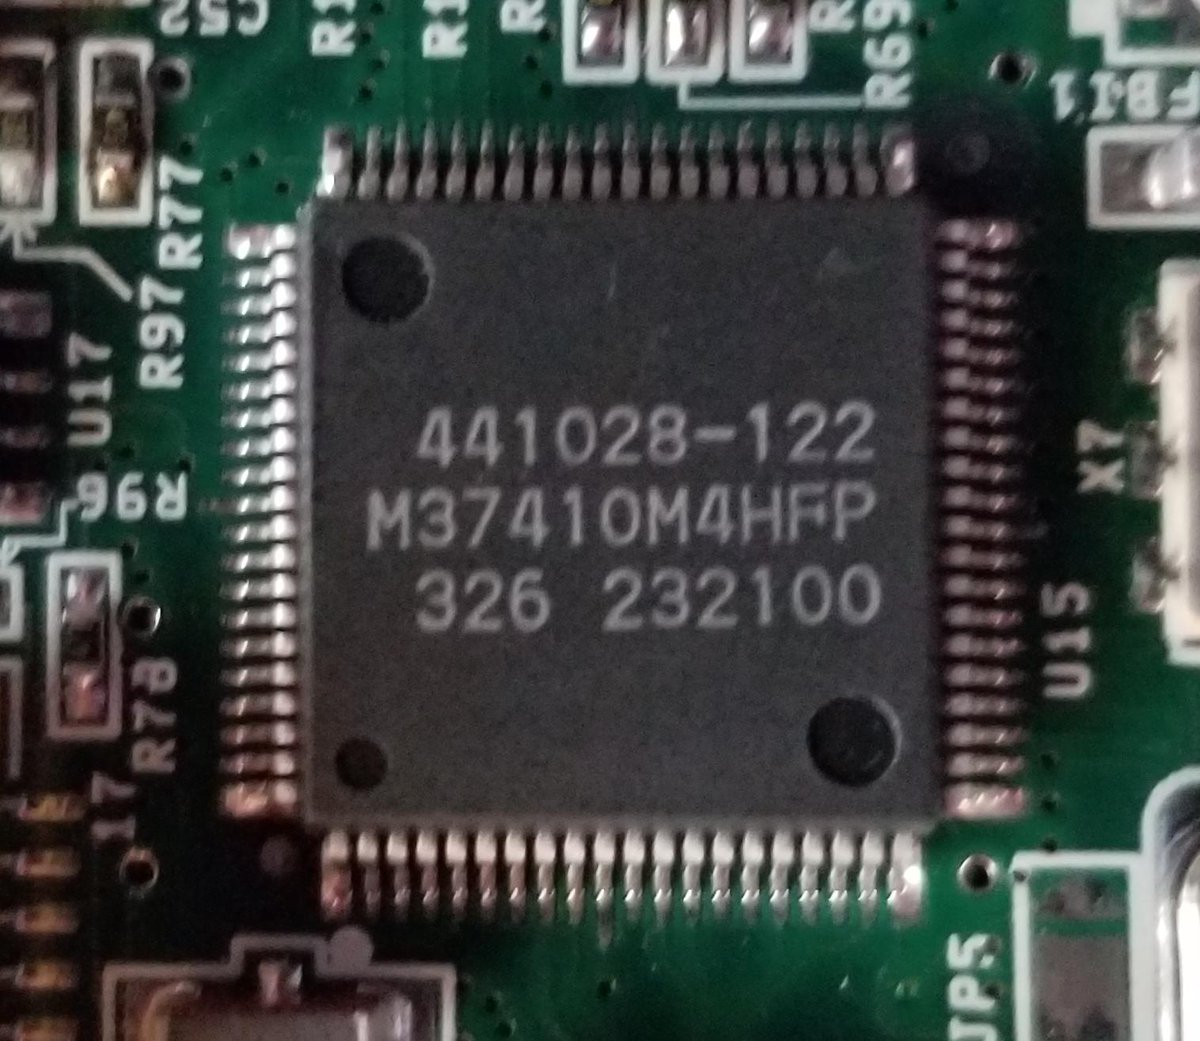 And a M37410M4HFP. This is an 8bit microcontroller, presumably used for the sound recording/playback stuff.